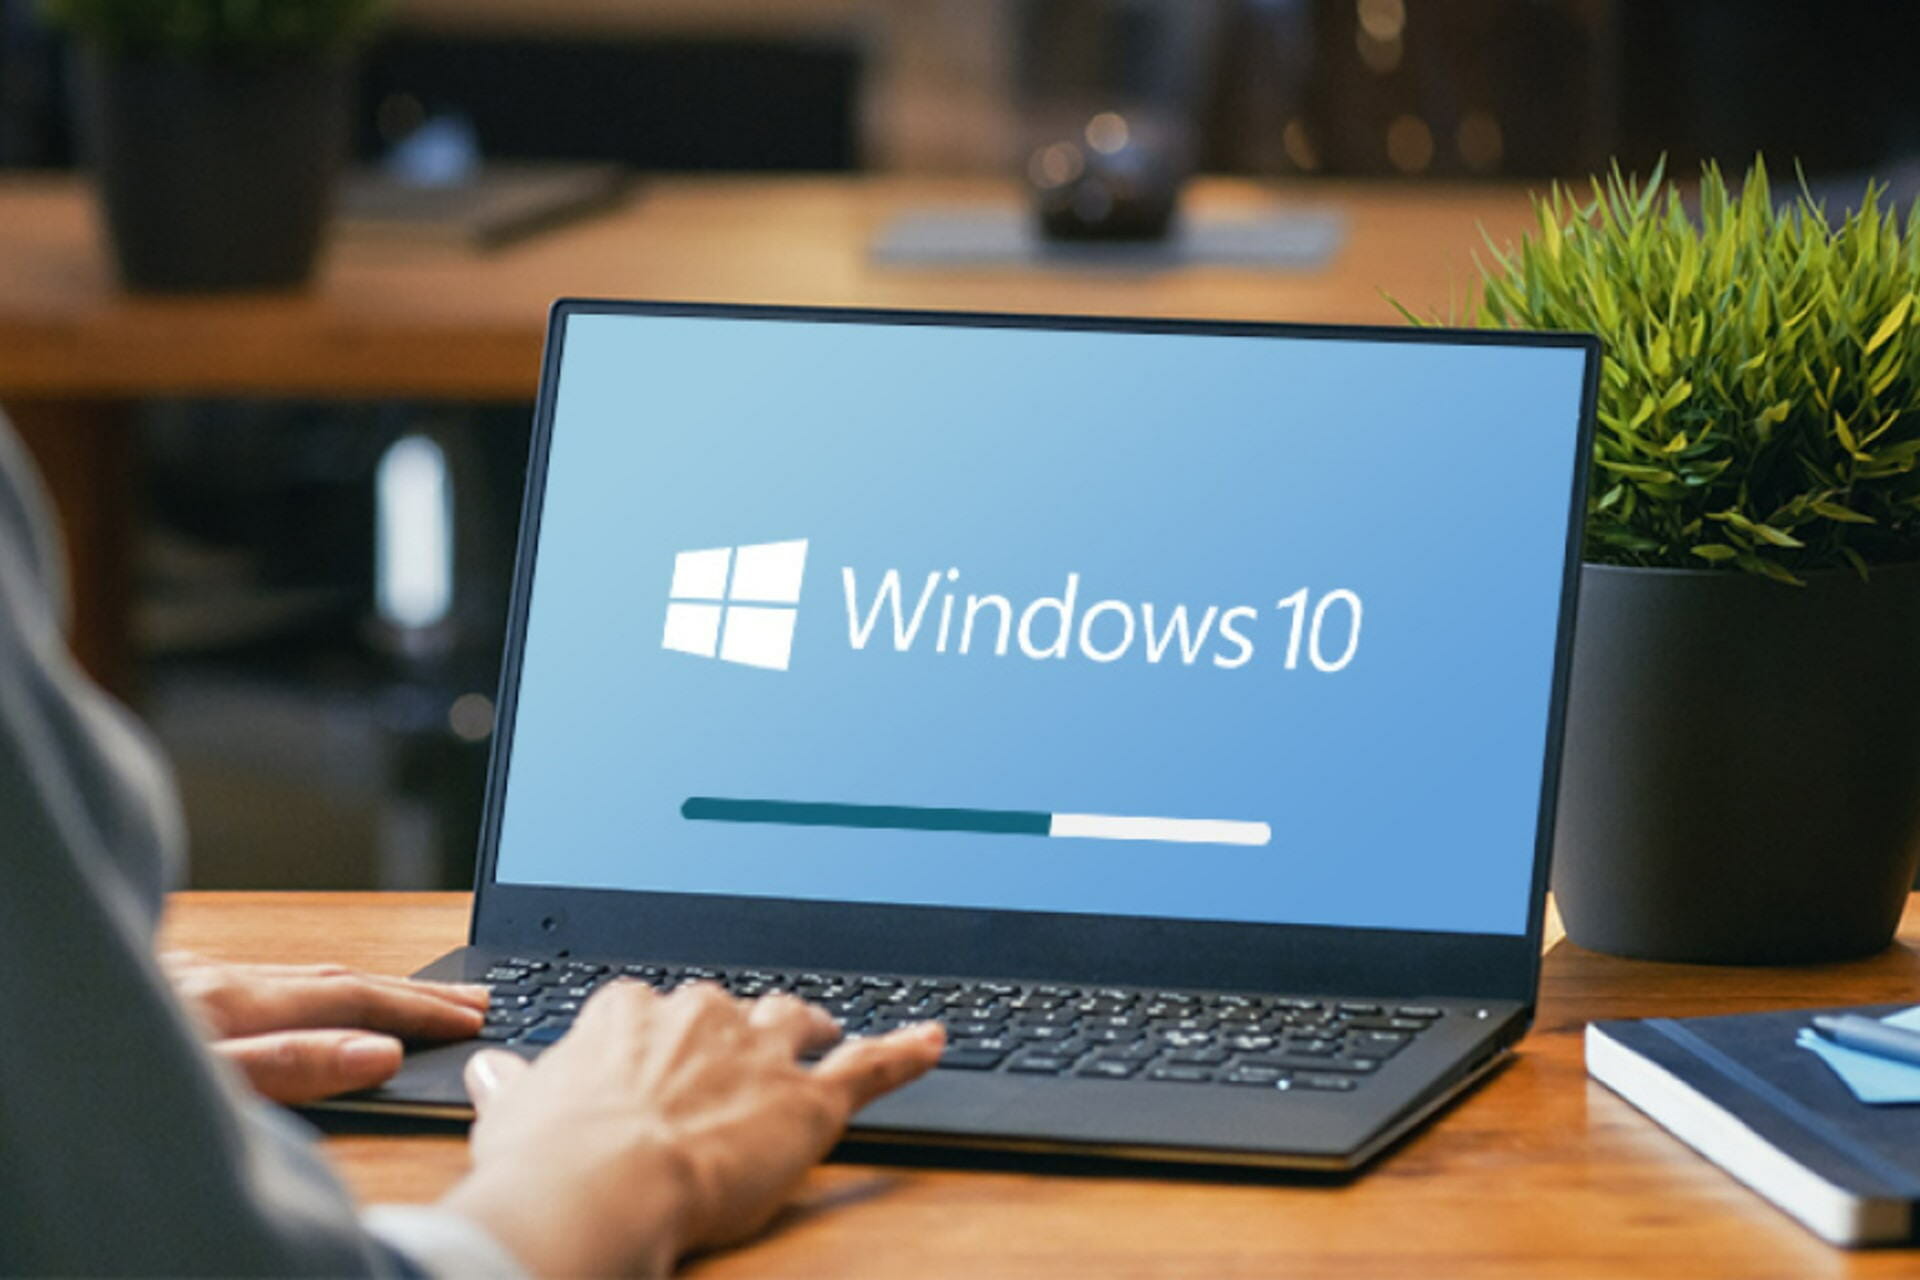 Microsoft's Known Issue Rollback fixes Windows 10 automatically